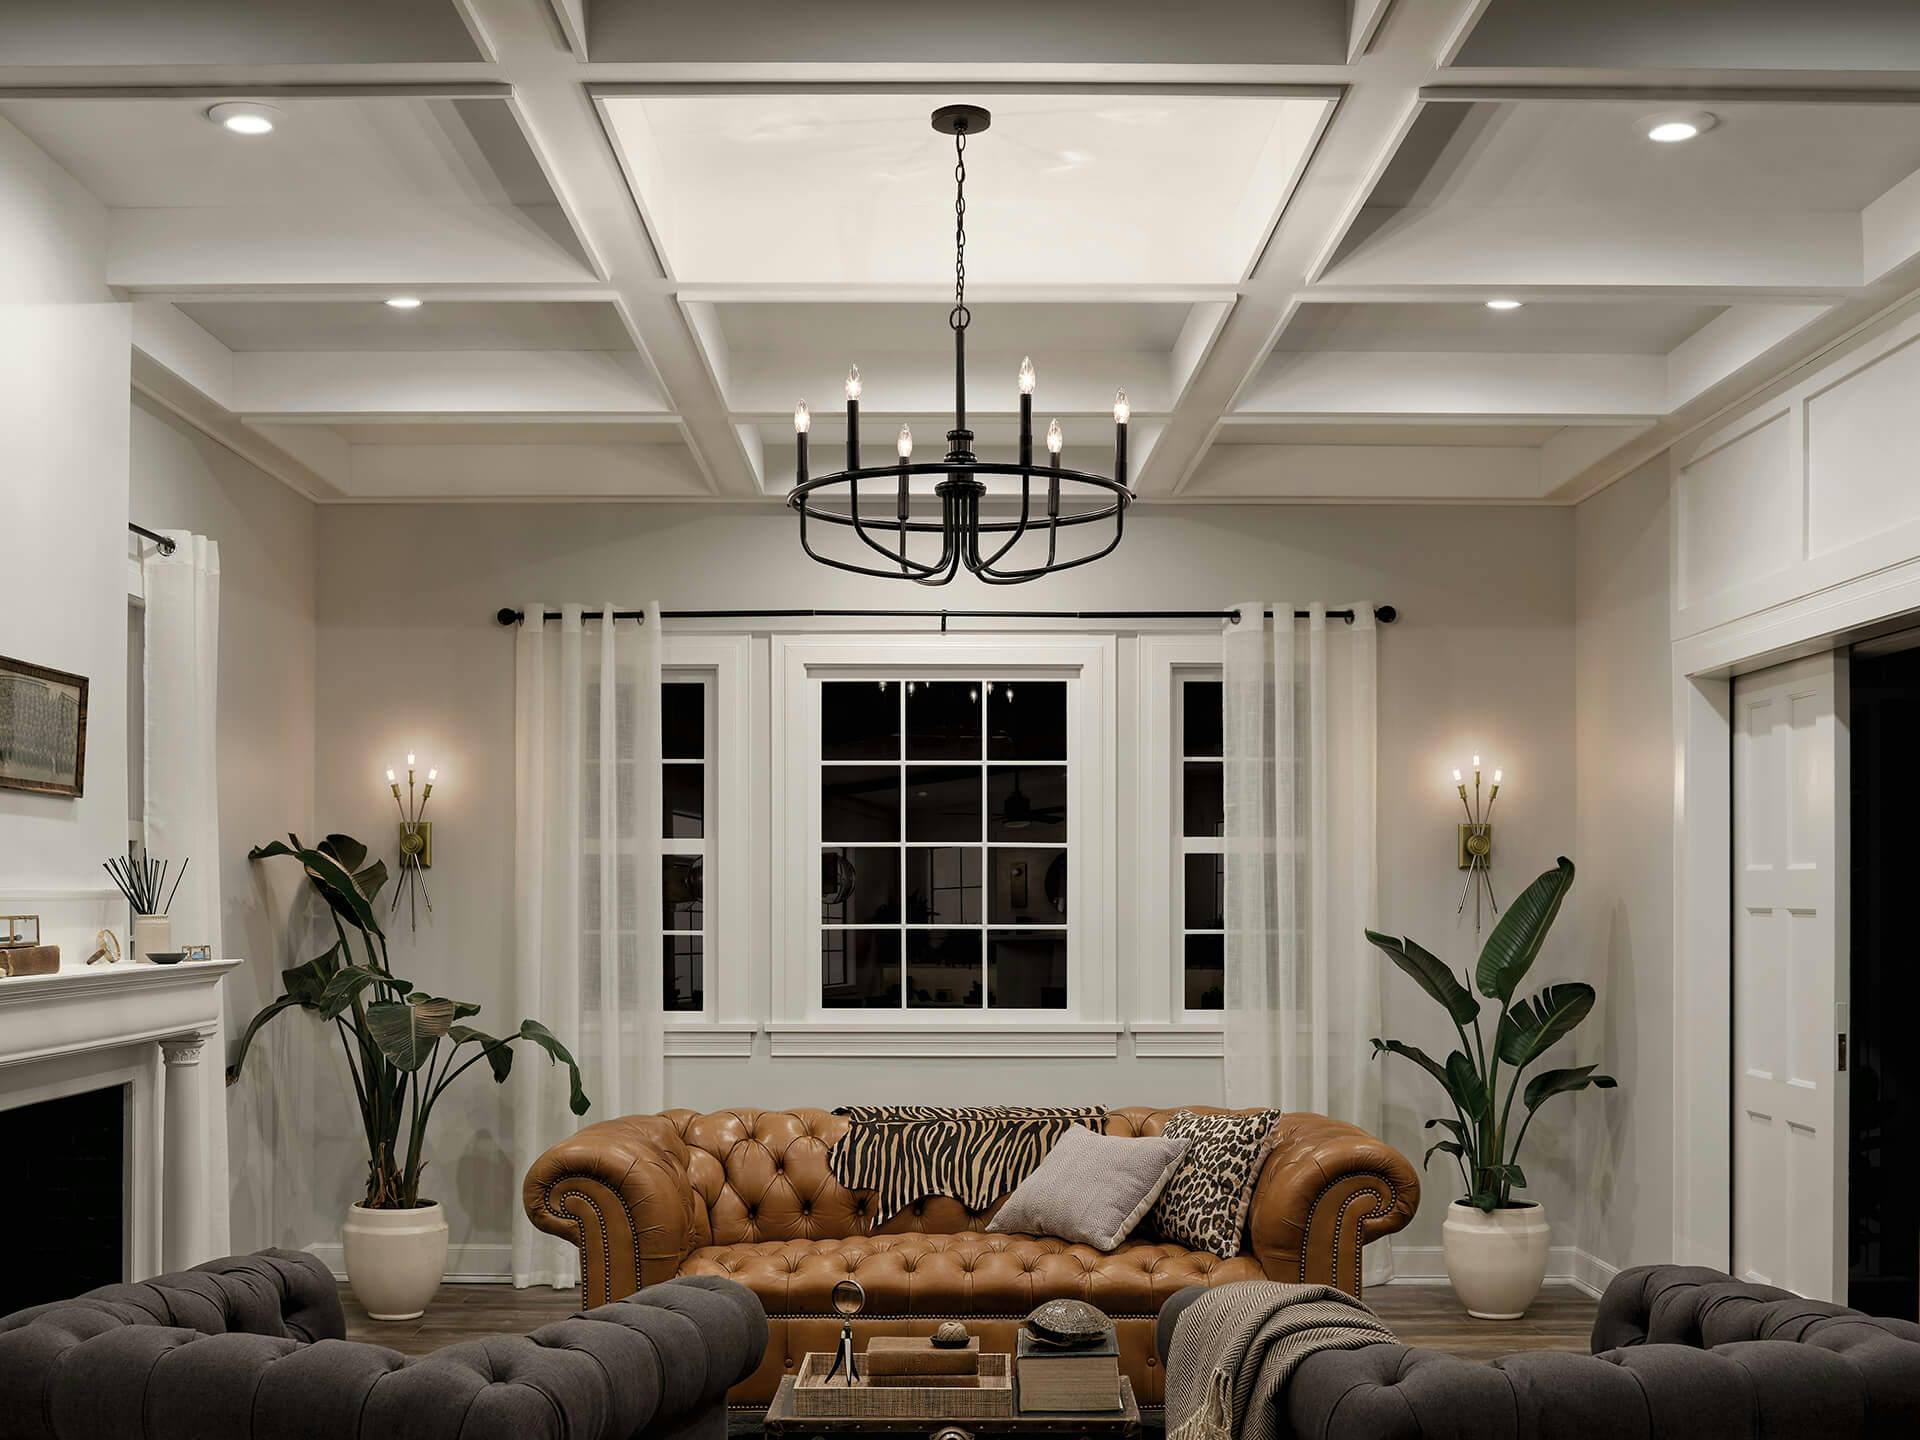 A white living room with tall, grid-like ceiling featuring downlighting throughout along with a Capitol Hill chandelier in the center and two Doncaster sconces on the back wall